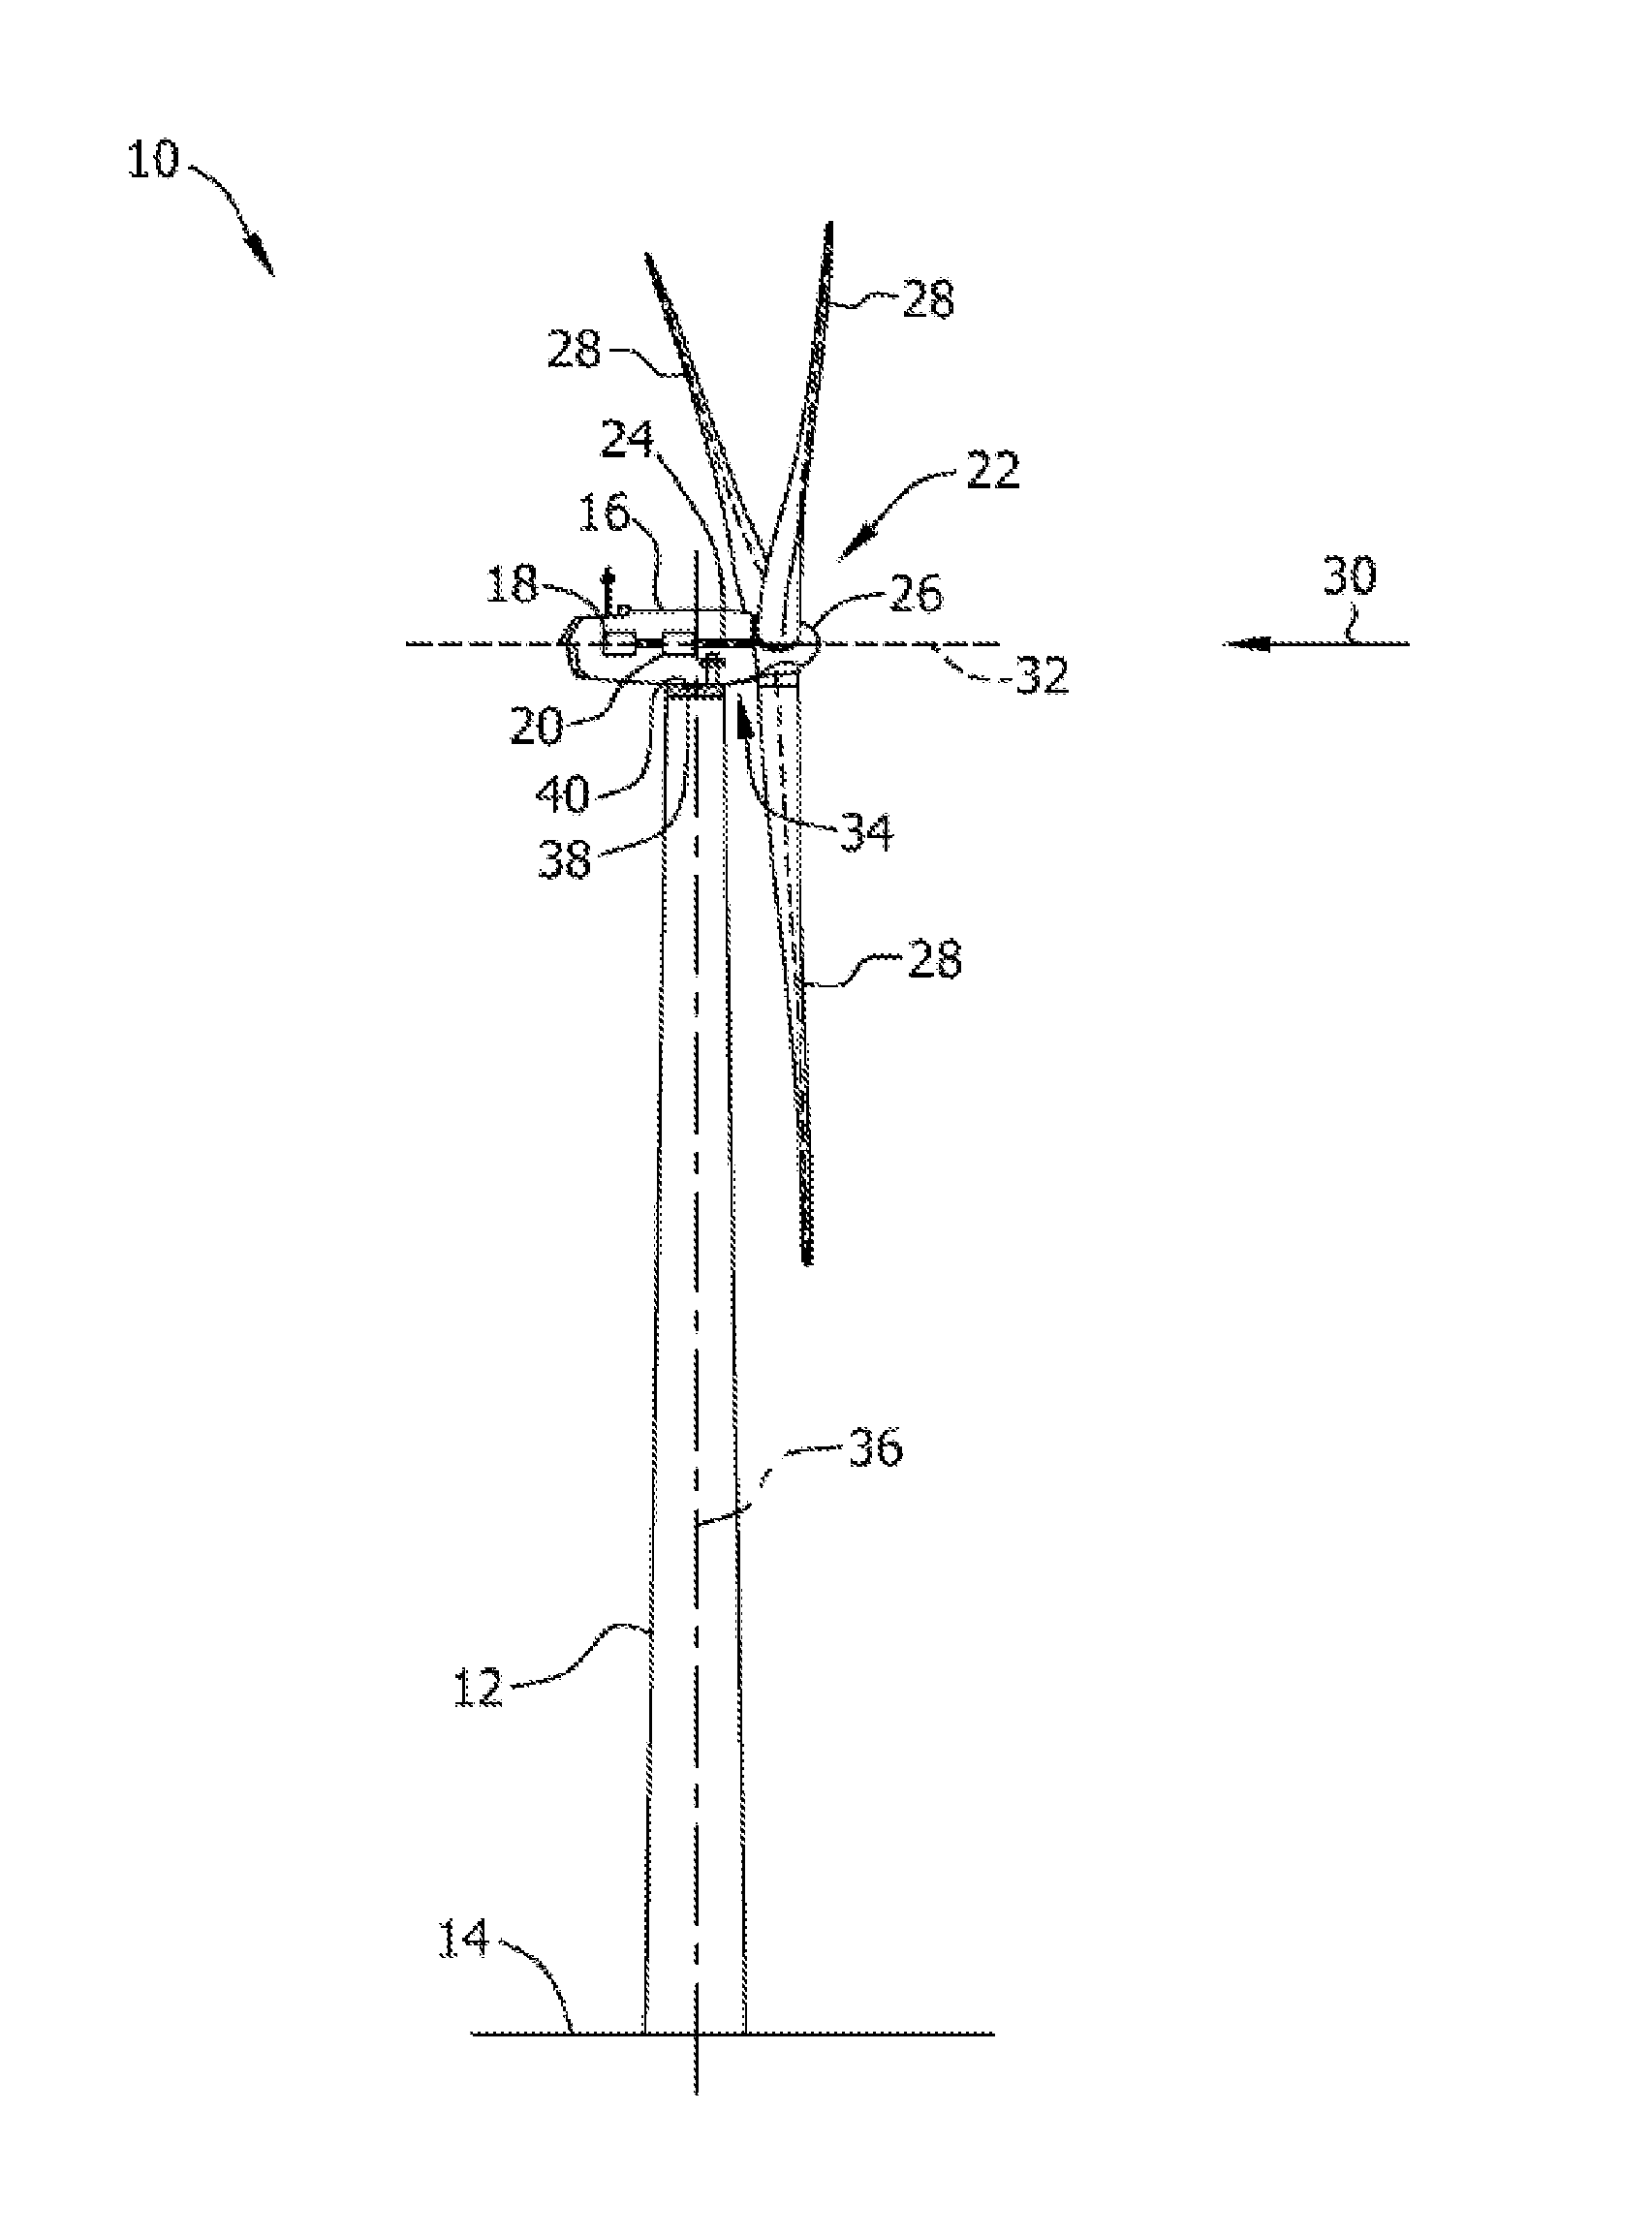 Overload slip mechanism for the yaw drive assembly of a wind turbine